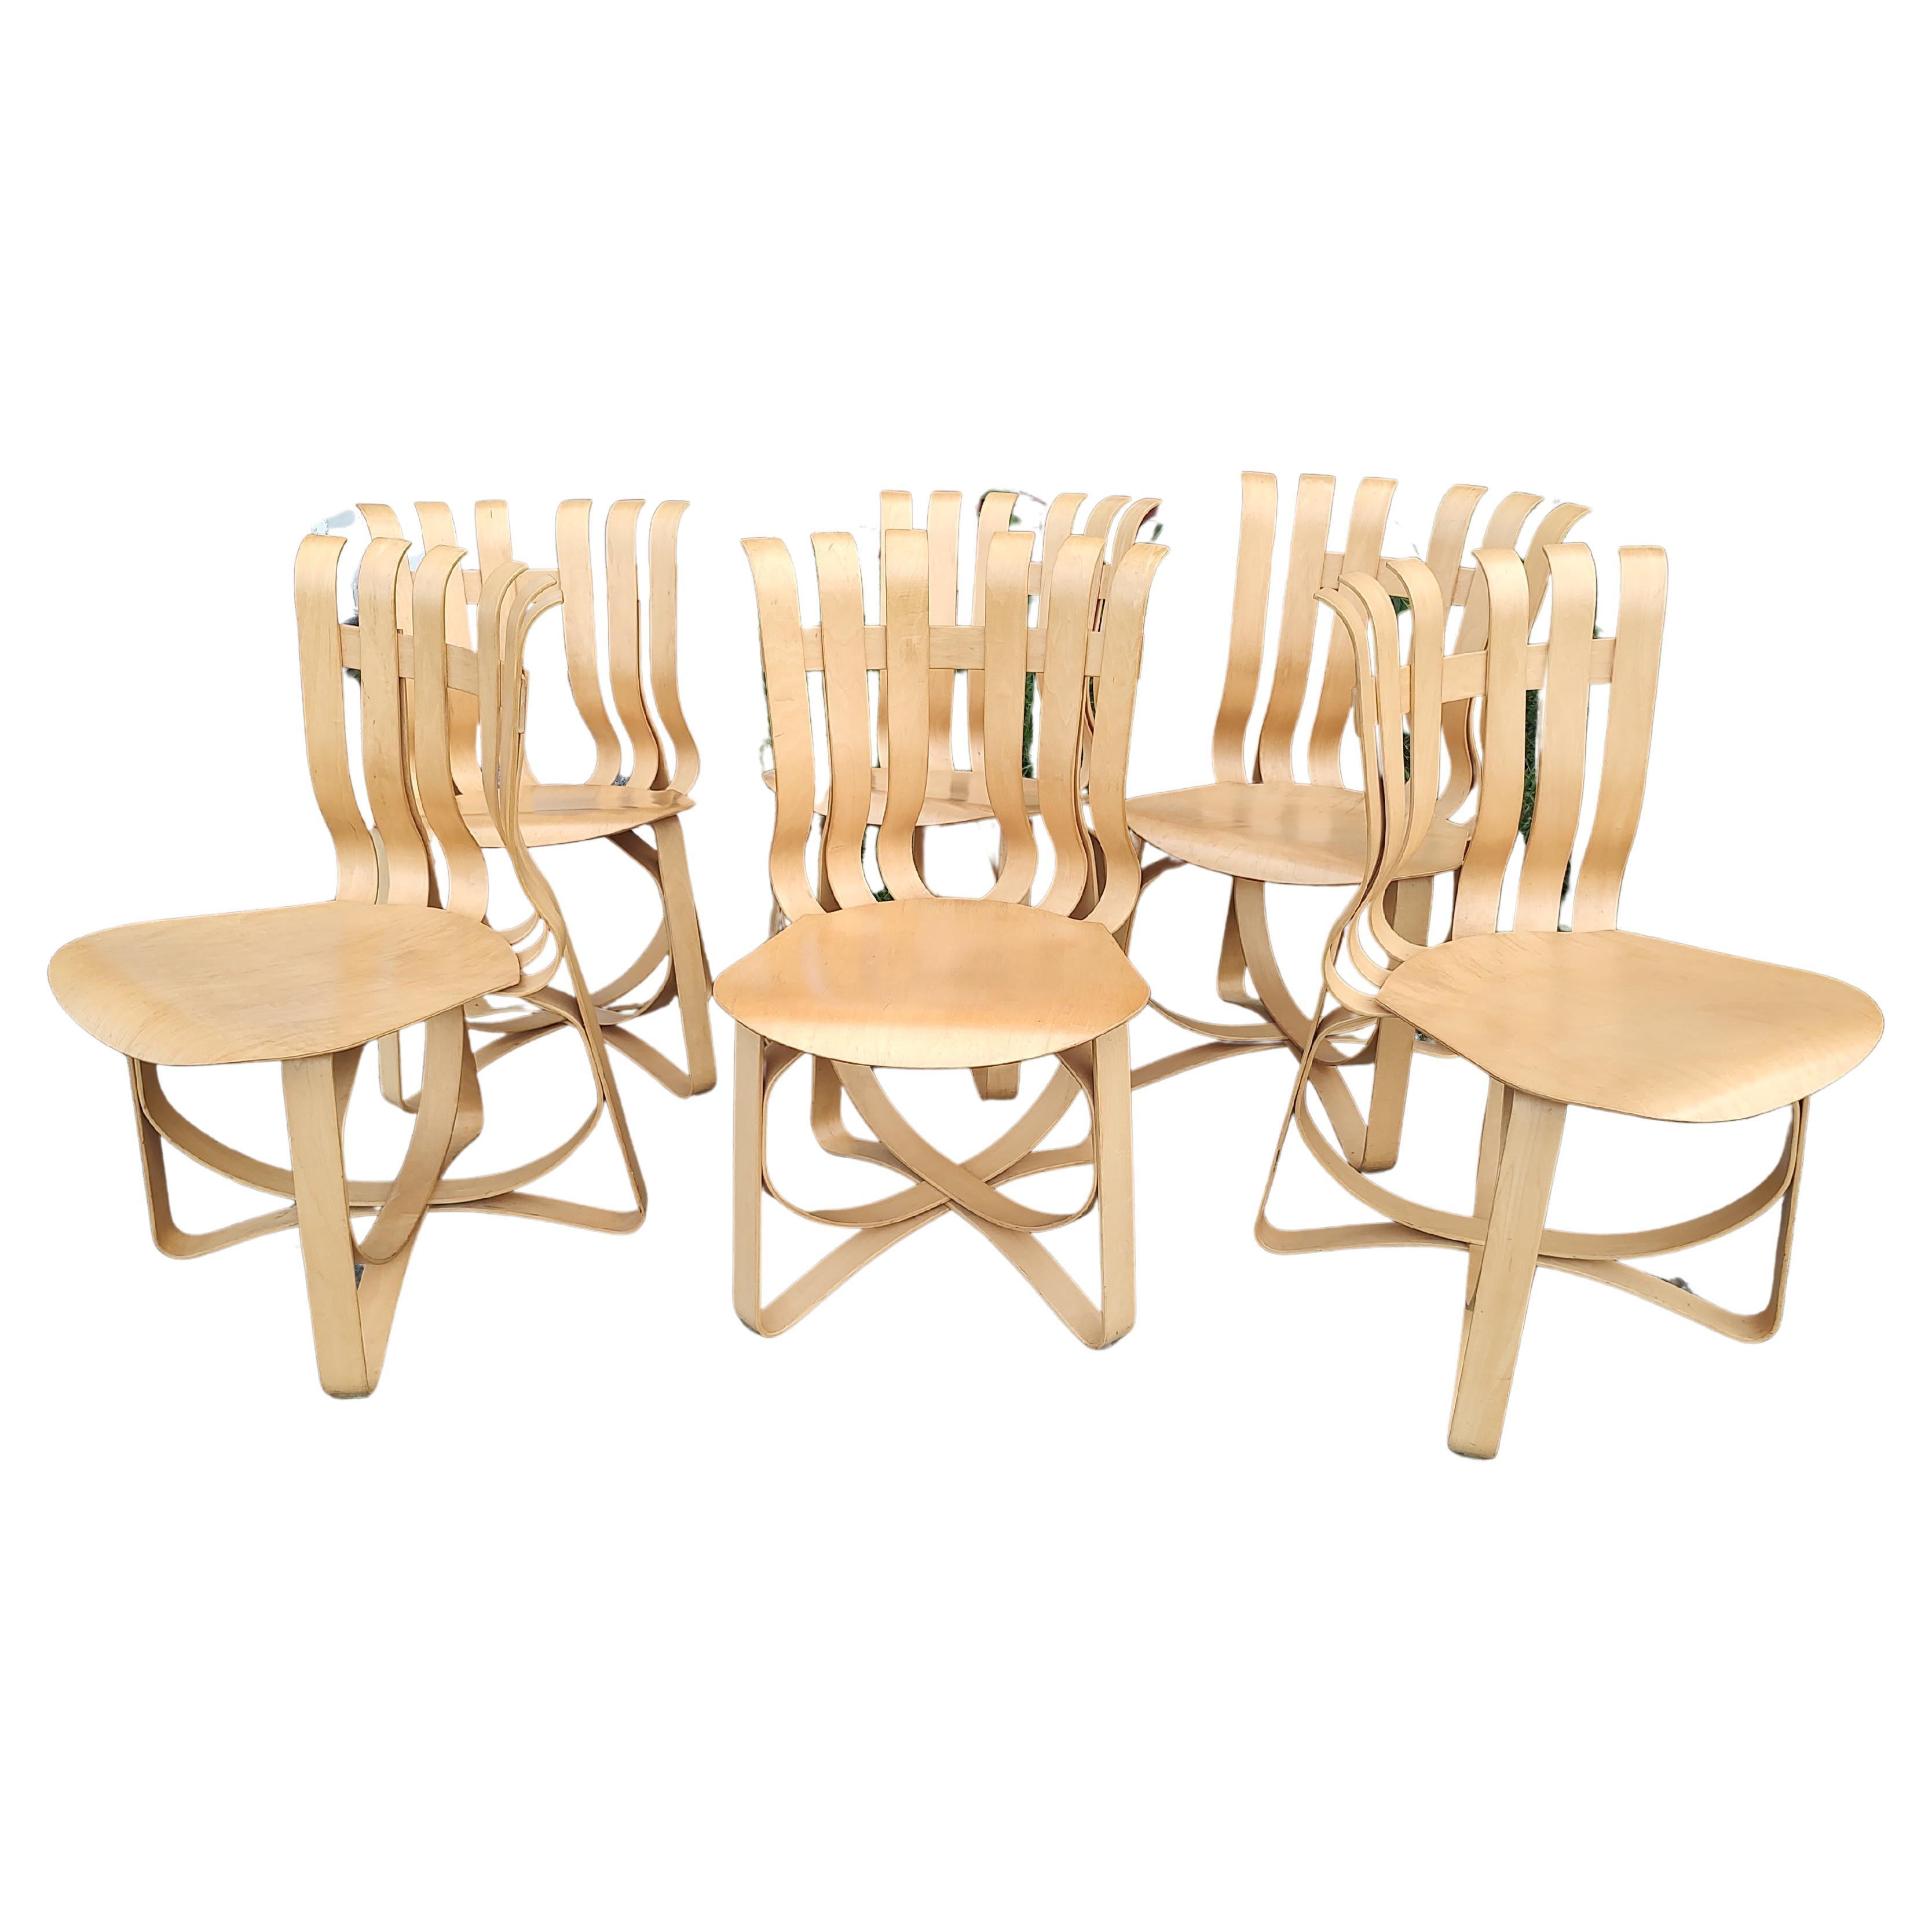 Mid Century Modern Sculptural Birch 6 Hat Trick Chairs by Frank Gehry - Knoll